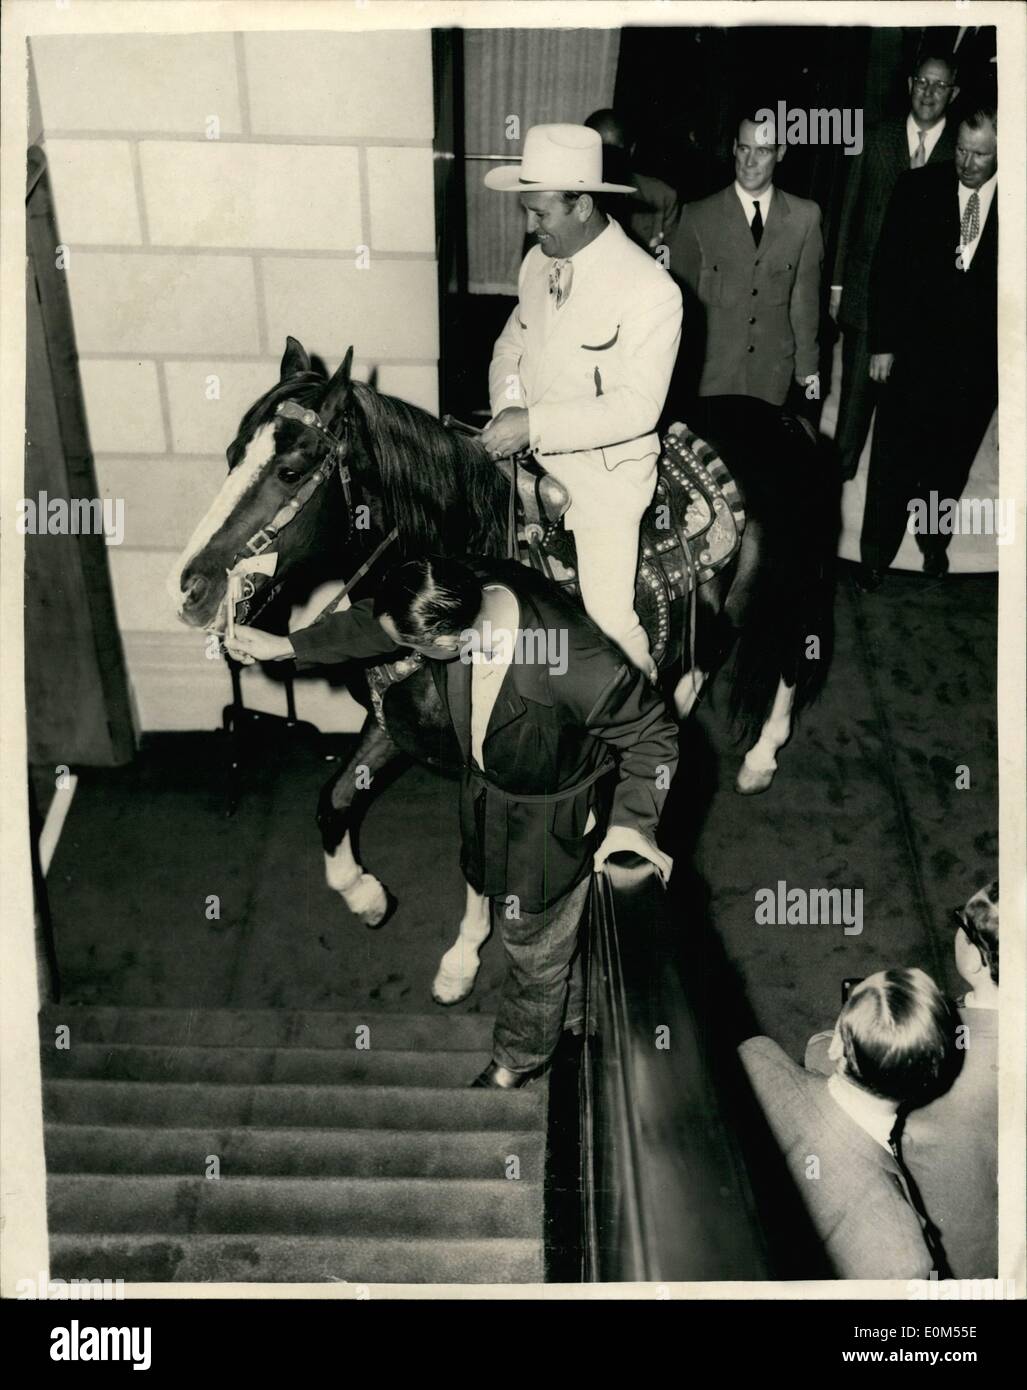 Jul. 07, 1953 - Champion goes to the press conference.. 21-7-53. Up the Stairs . not me. says Champion . Cowboy screen star Gene Autry took his horse Champion with him when he went to the press reception in their honour at the Savoyu this evening. Keystone Photo Shows: One of the stablemen tries to coax Champion . with Gene Autry up Ã¢â‚¬â€œup the stairs. but he would not go at the Savoy this evening. JSS/Keystone Stock Photo